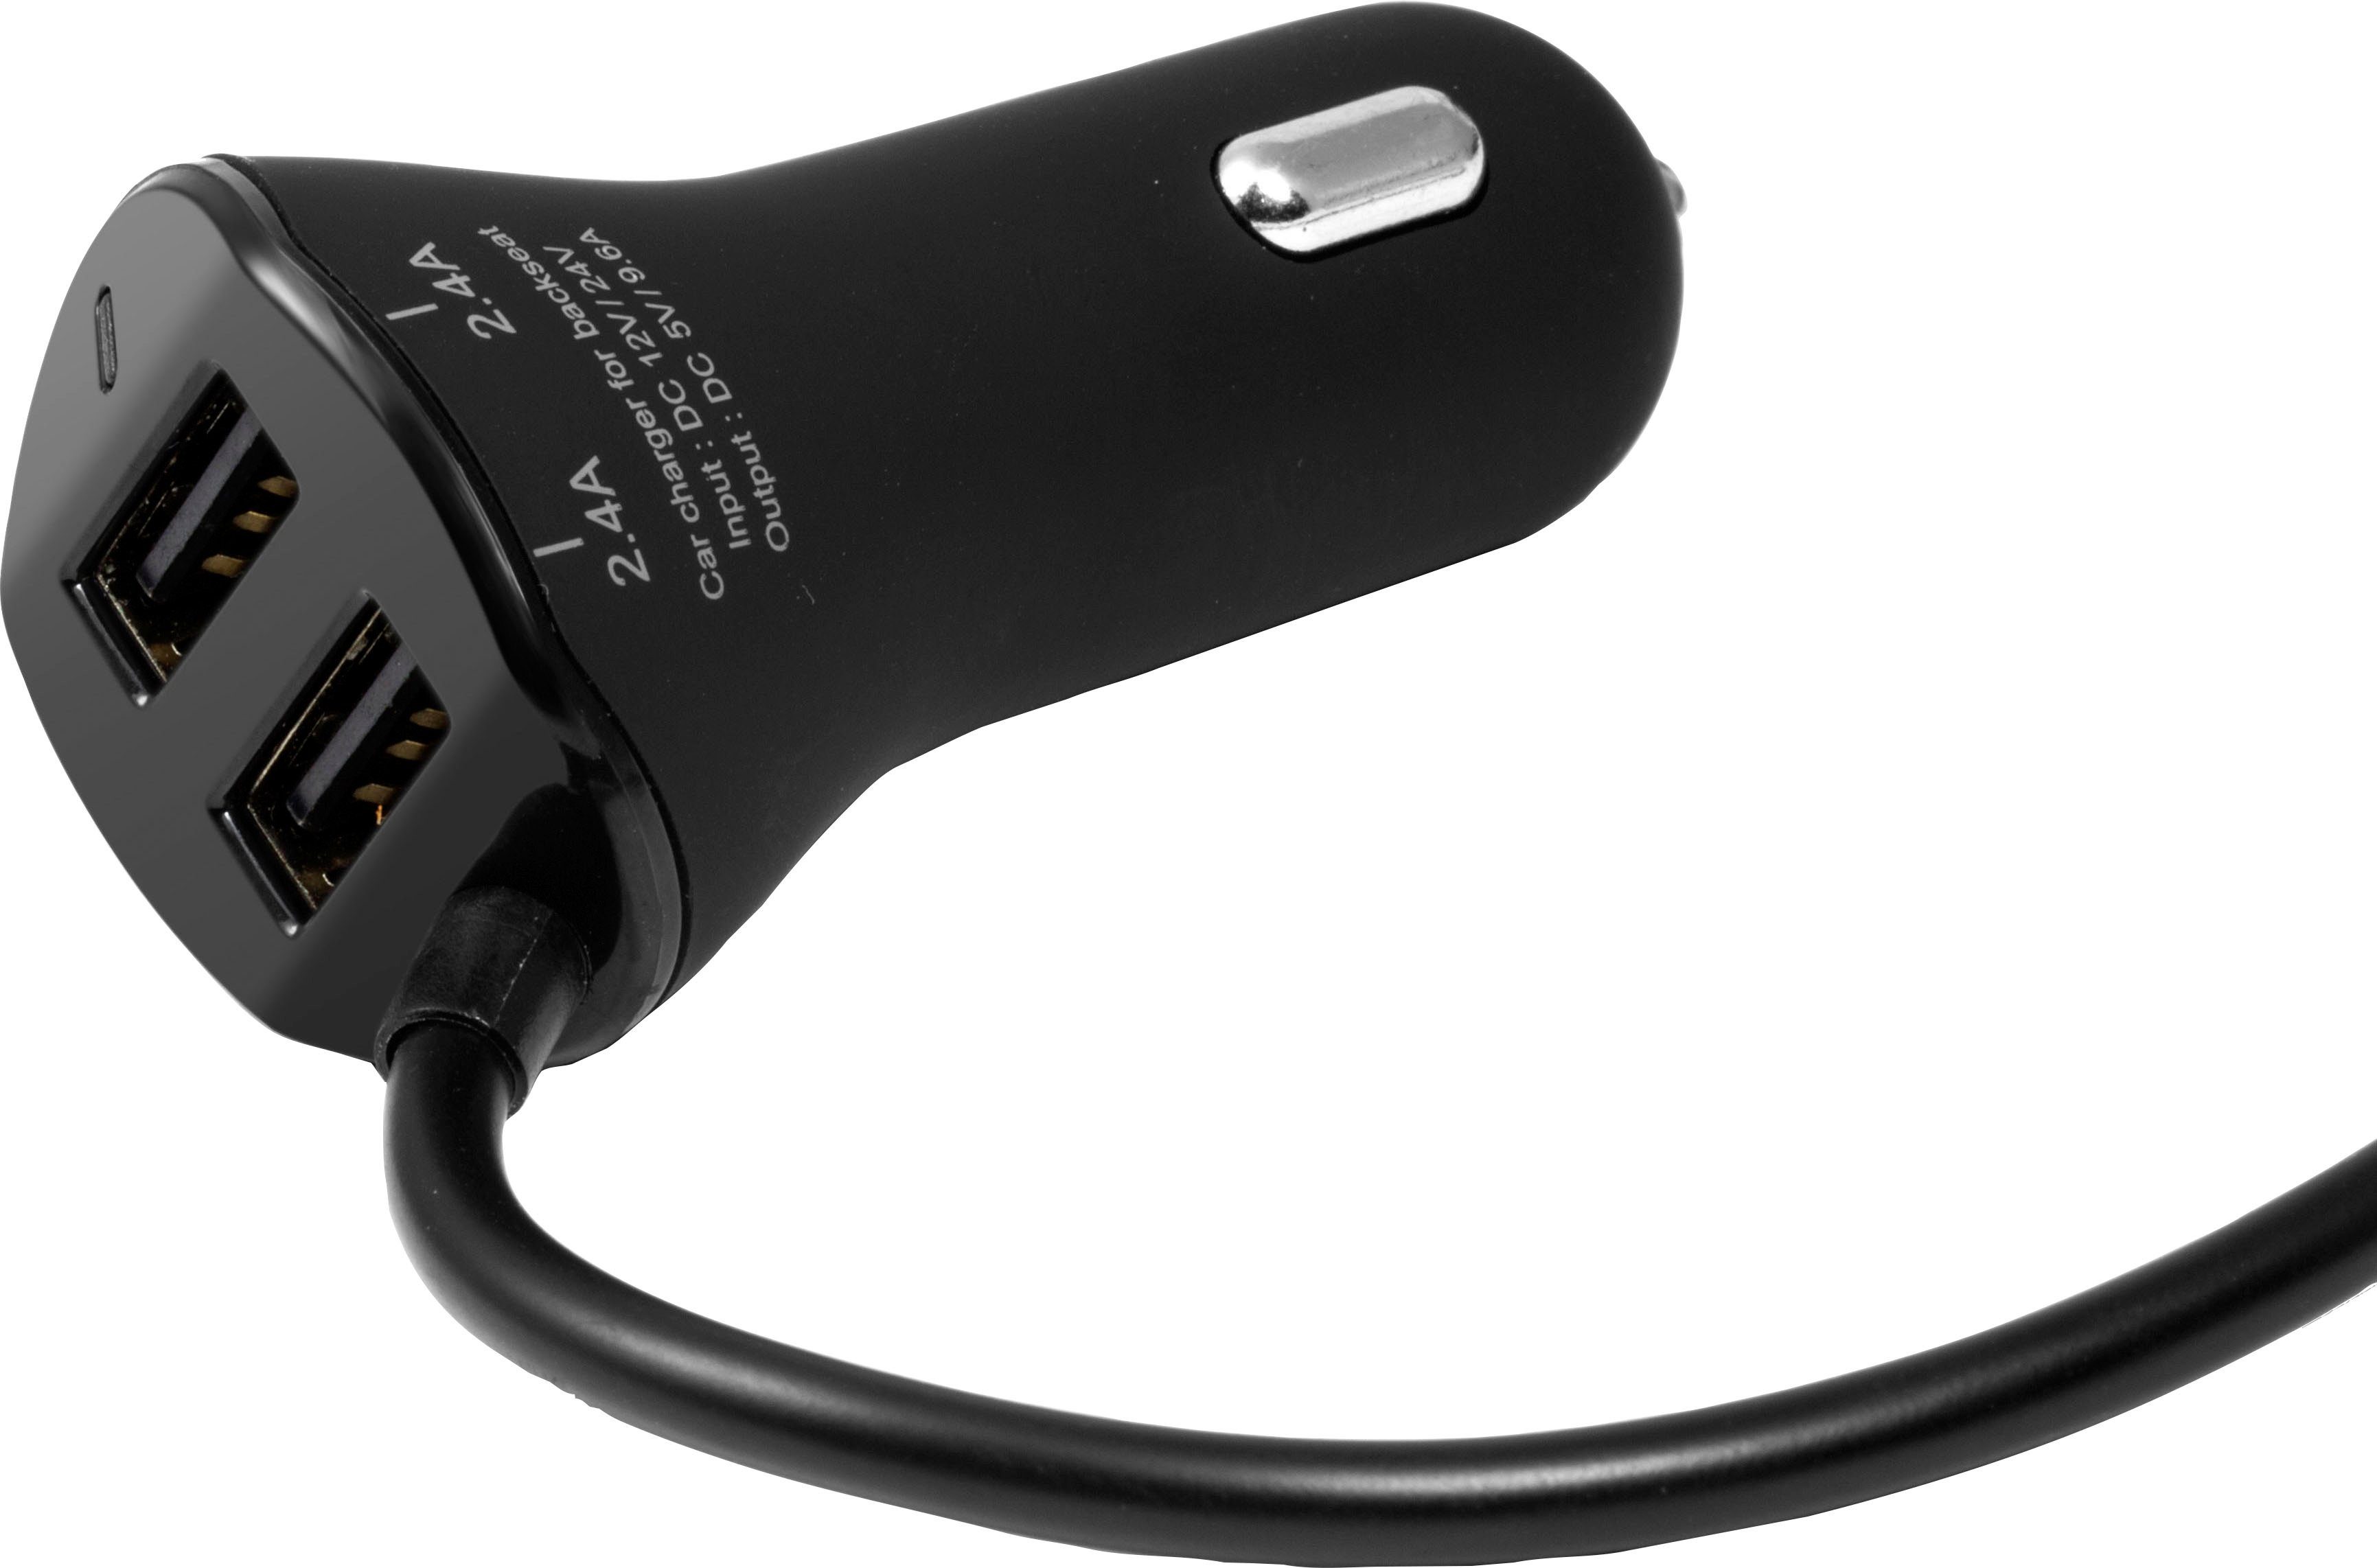 KFZ-Adapter Car Charger TE14 Technaxx Family